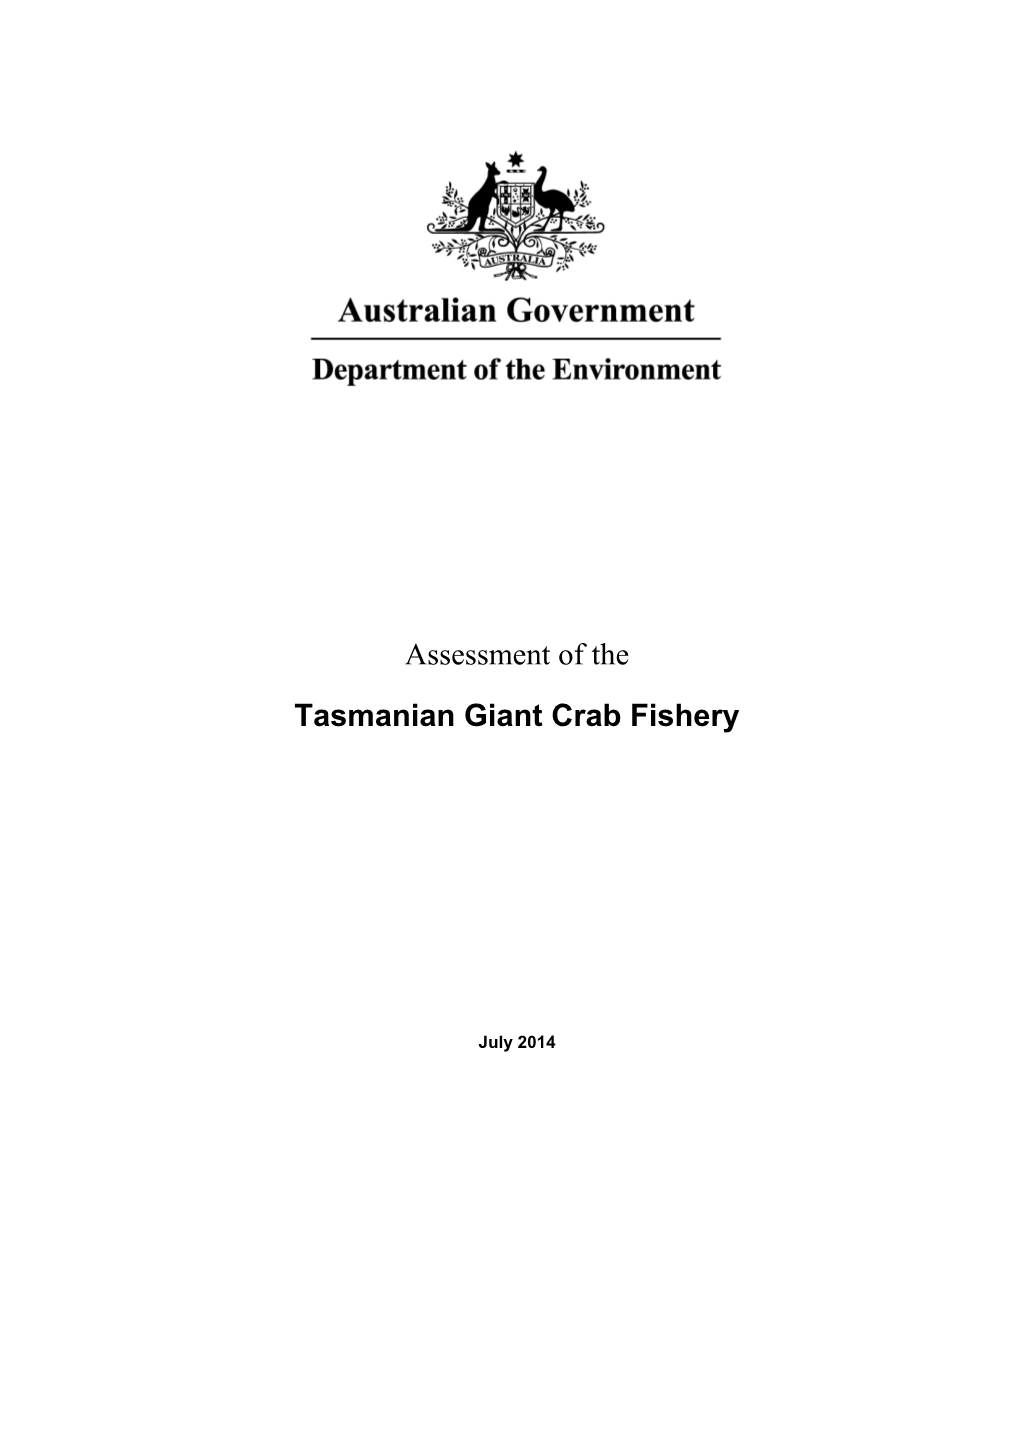 Assessment of the Tasmanian Giant Crab Fishery